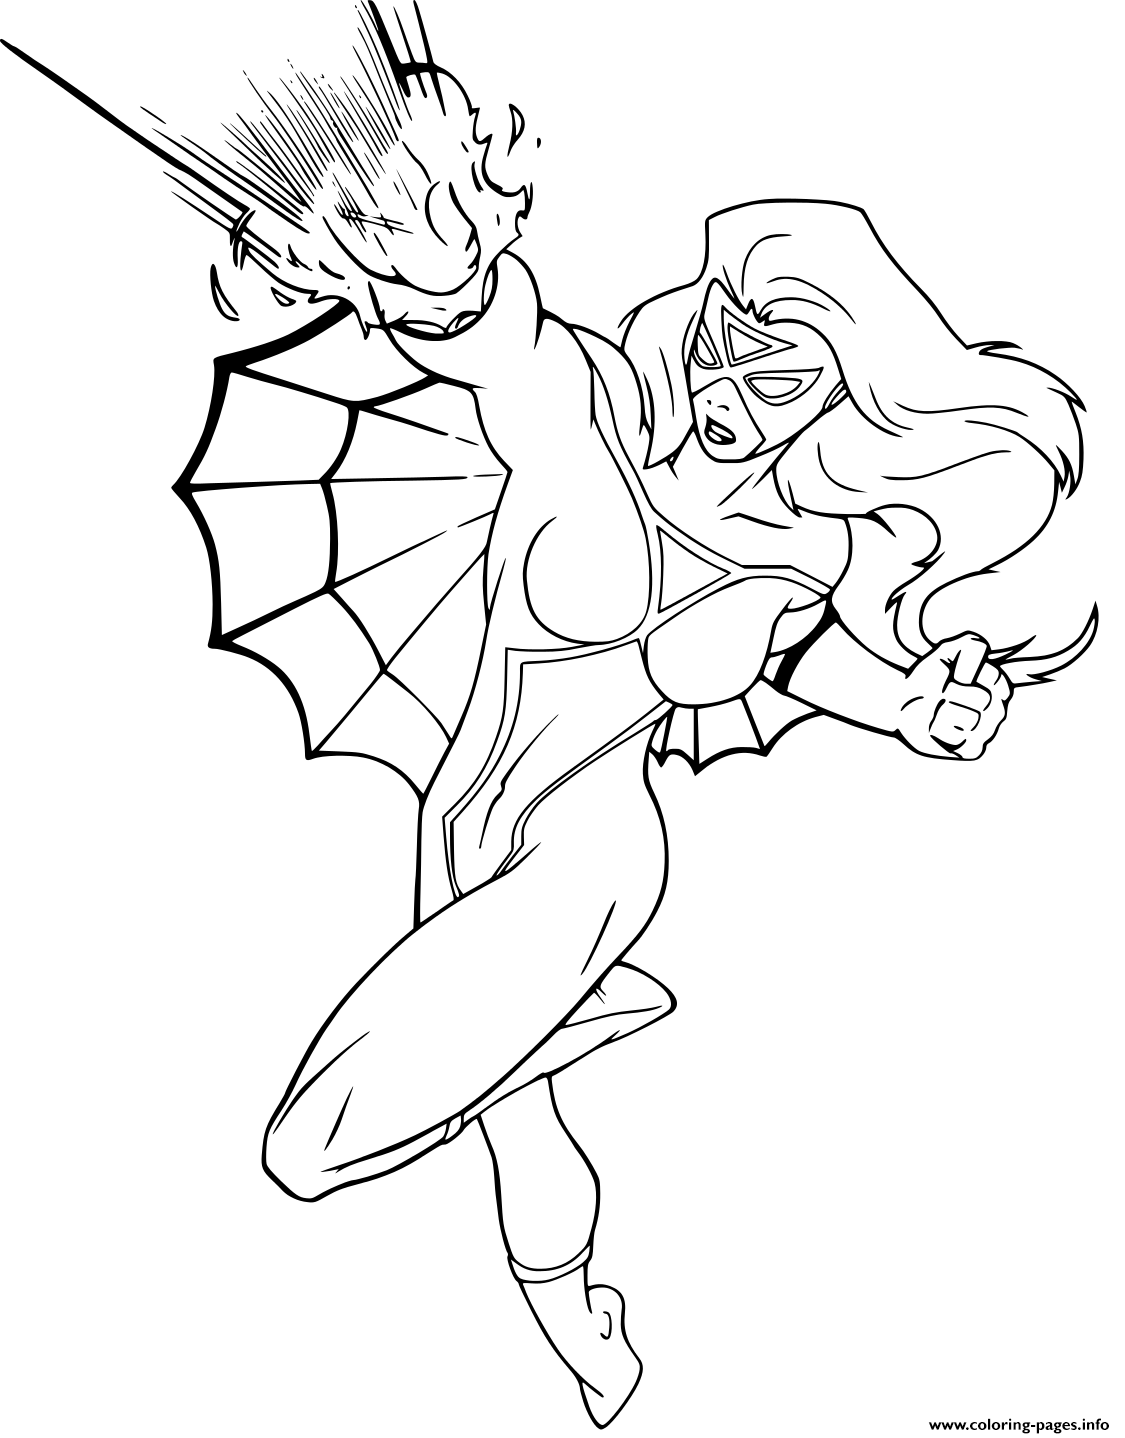 Spider Gwen Coloring Pages - Coloring Home.